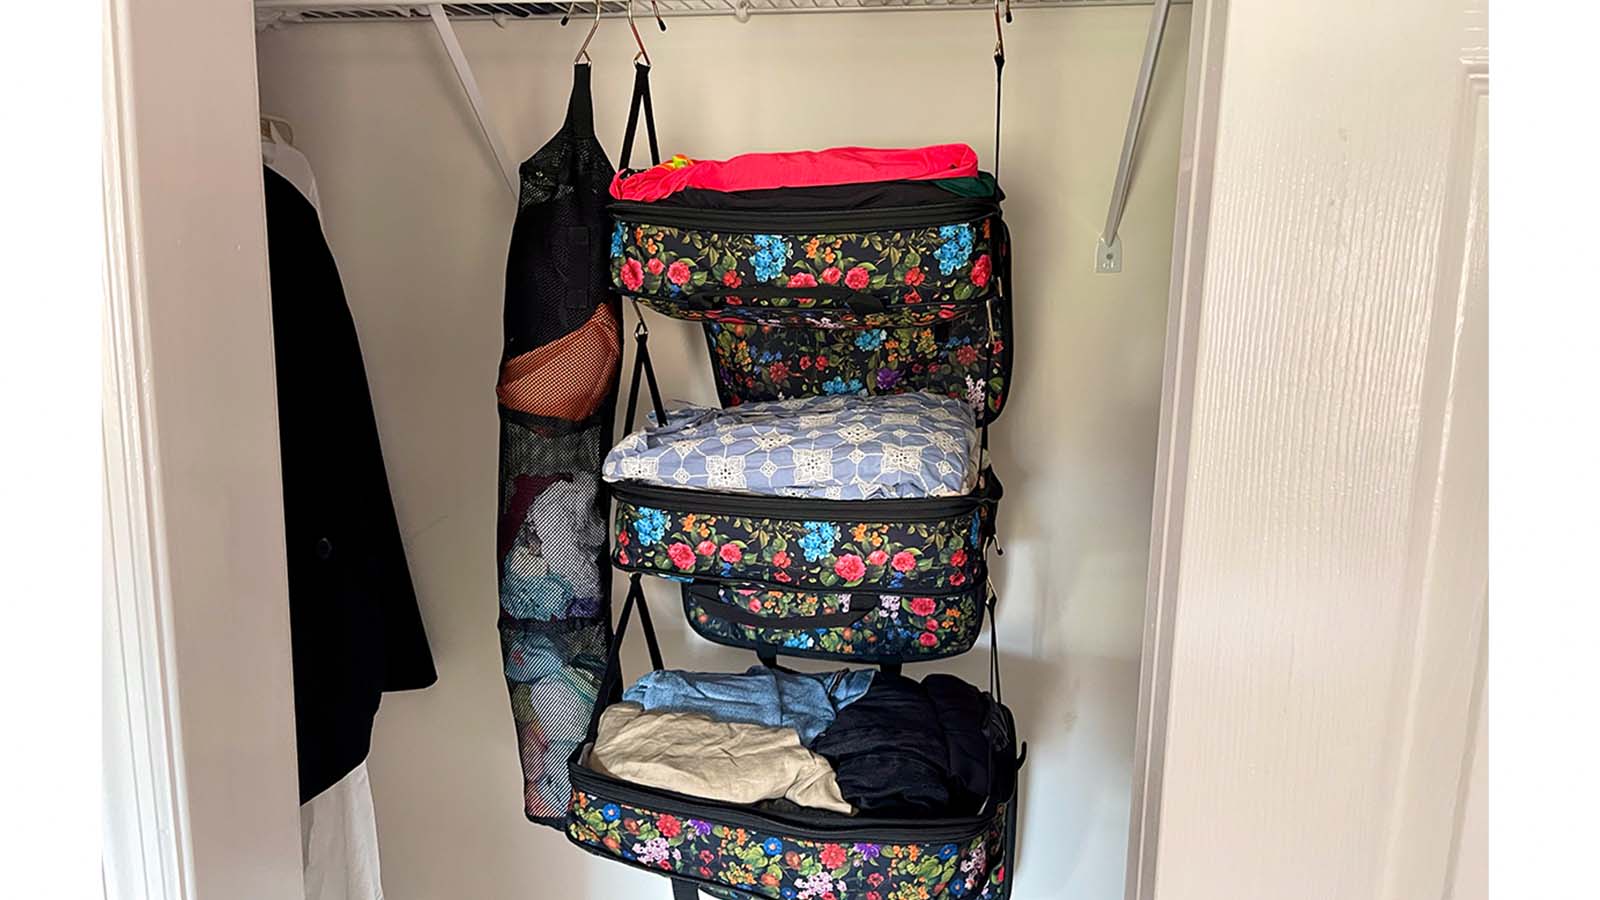 Clothes Compression Bag - Perfect For Travel, Bedroom Organization